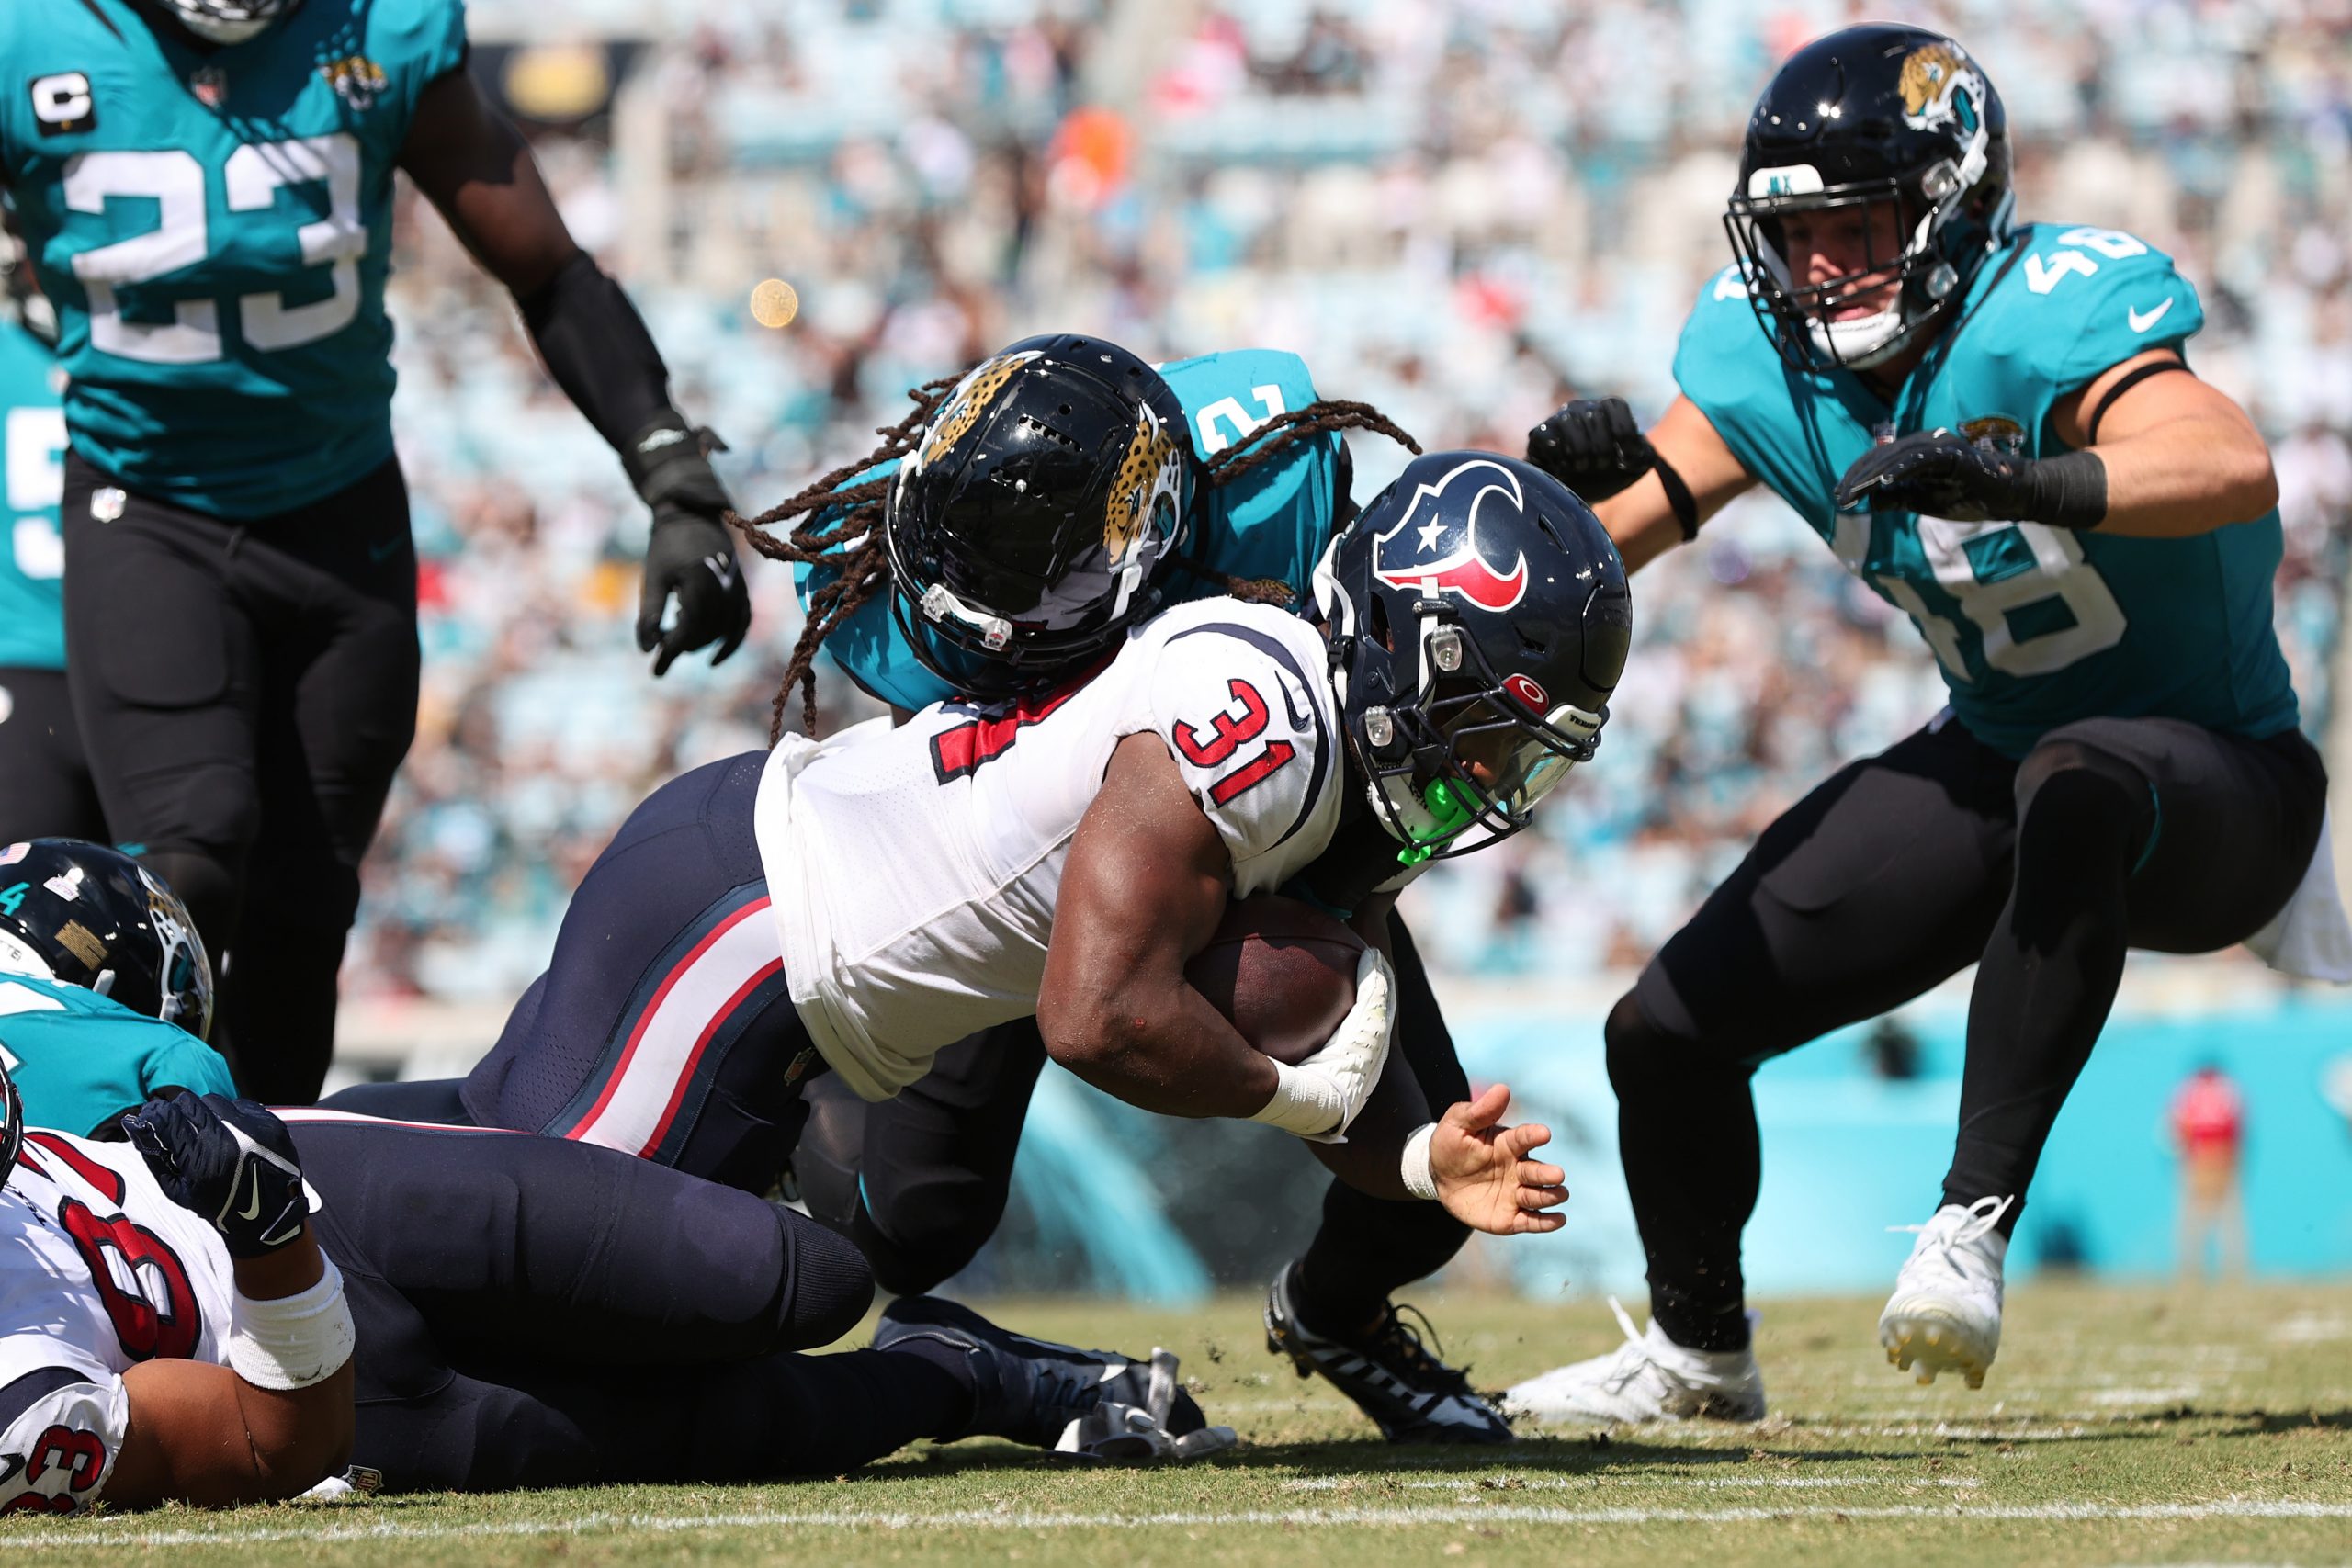 Dameon Pierce #31 of the Houston Texans is tackled by Rayshawn Jenkins #2 of the Jacksonville Jagua...